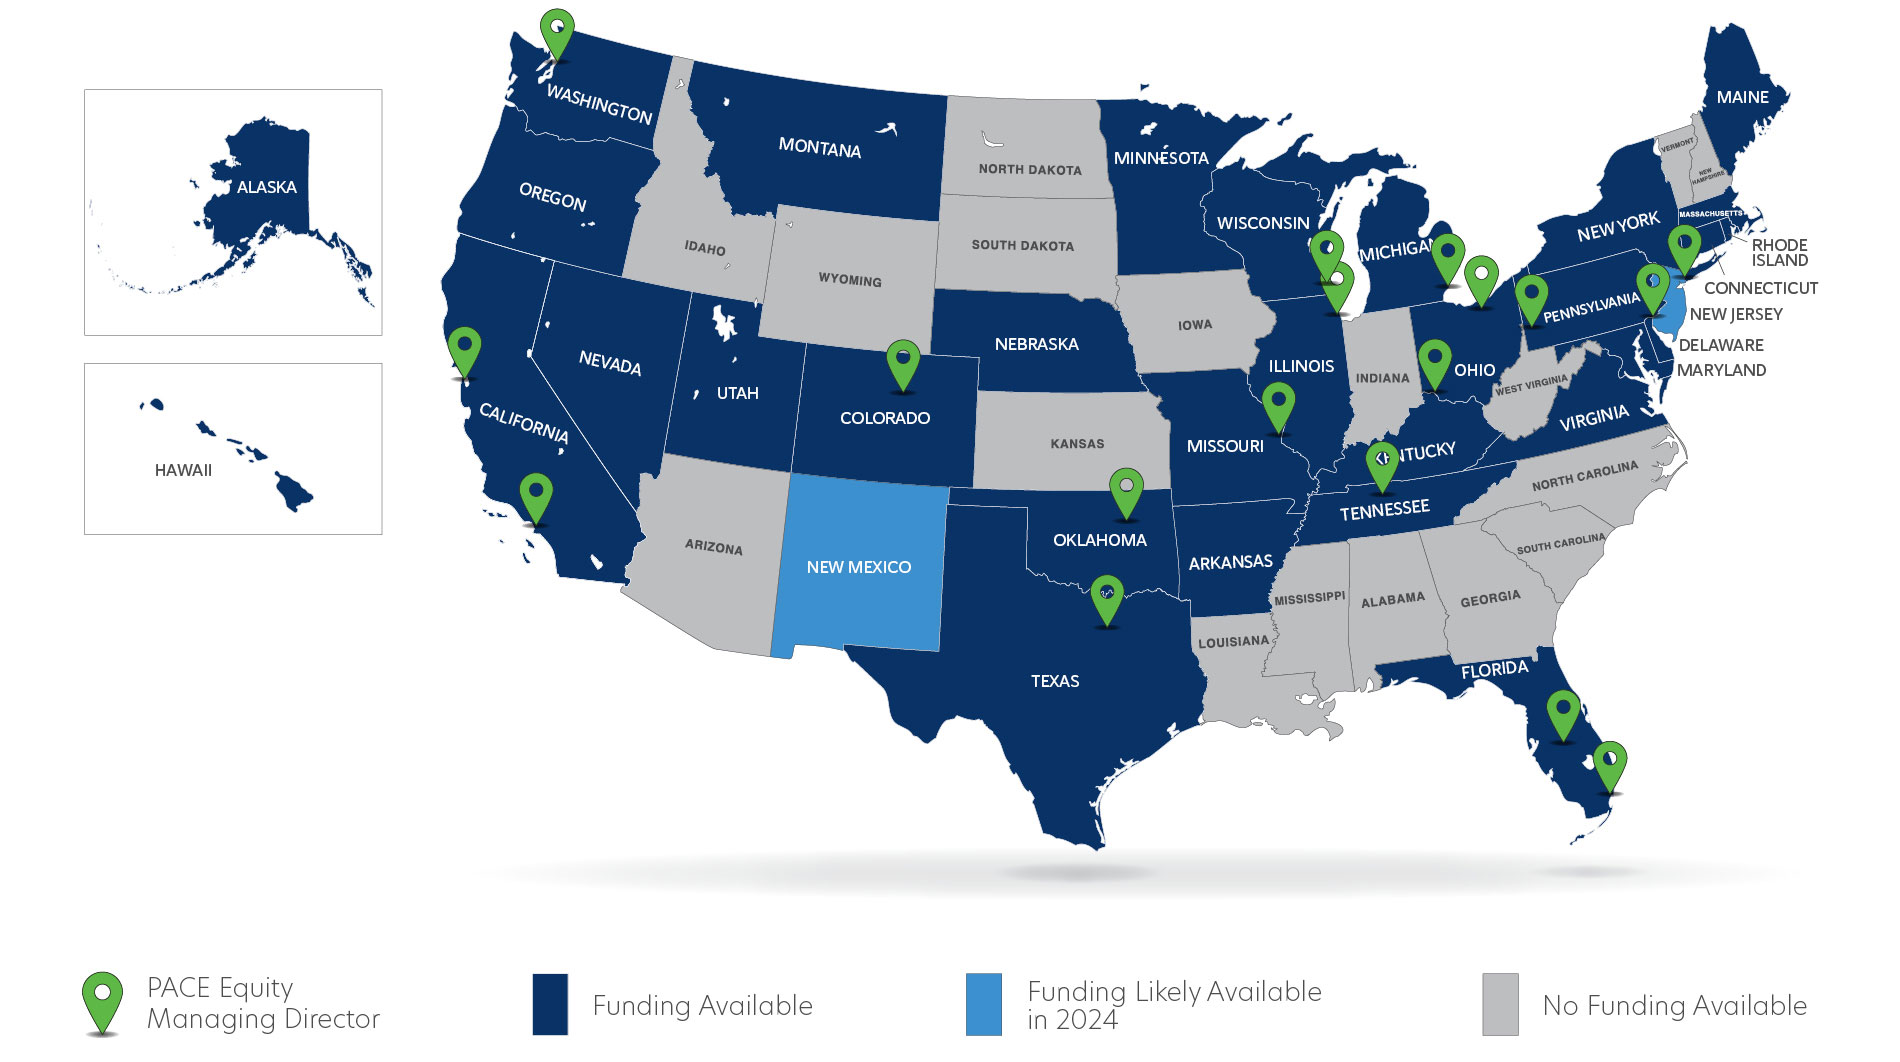 PACE Equity Funding Map